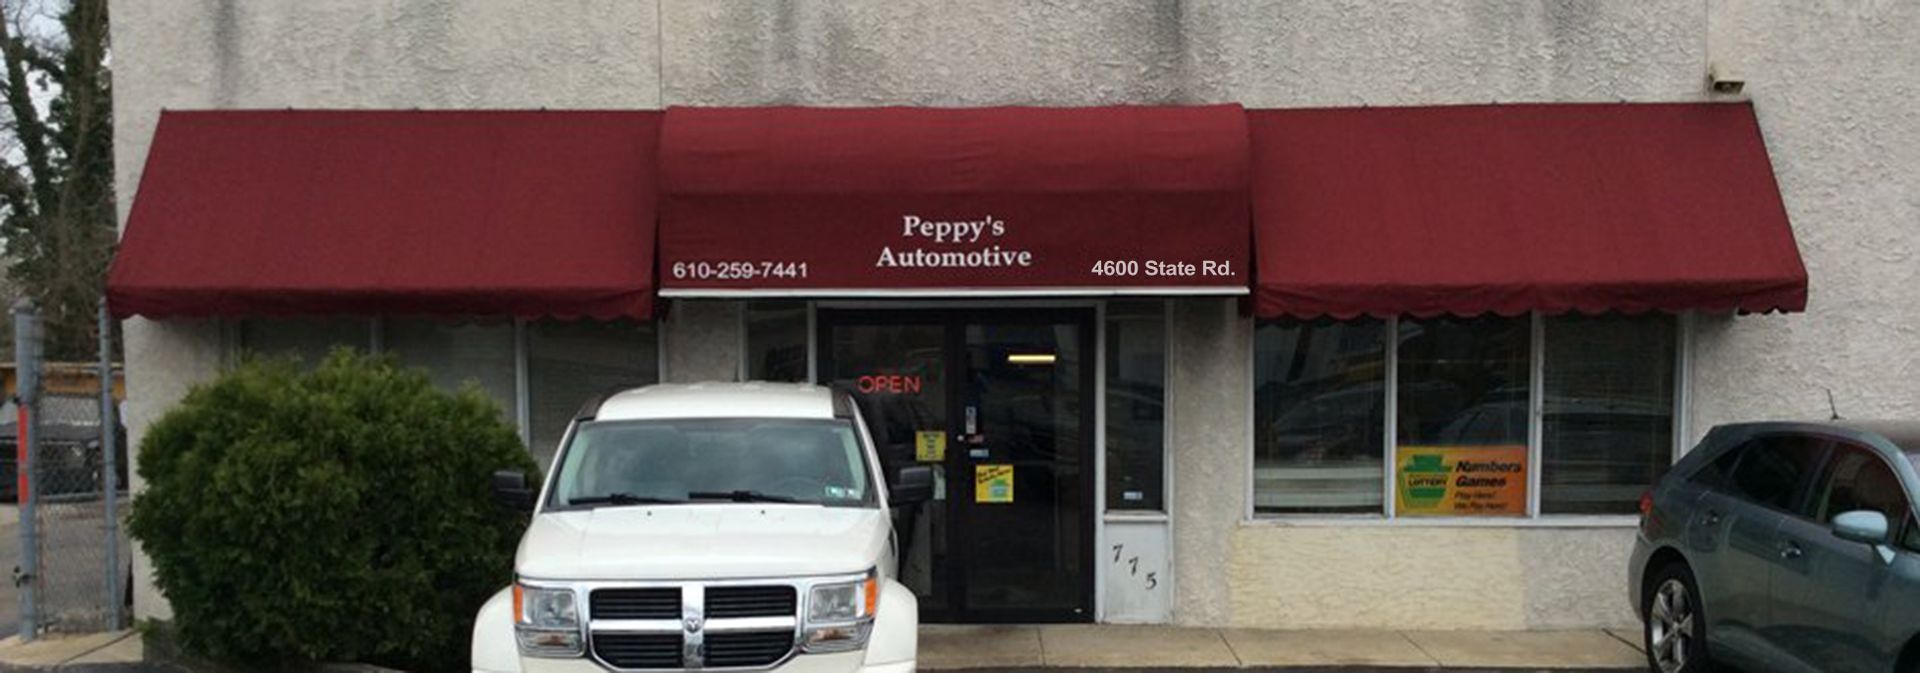 Front of Peppy's Automotive with white and black cars